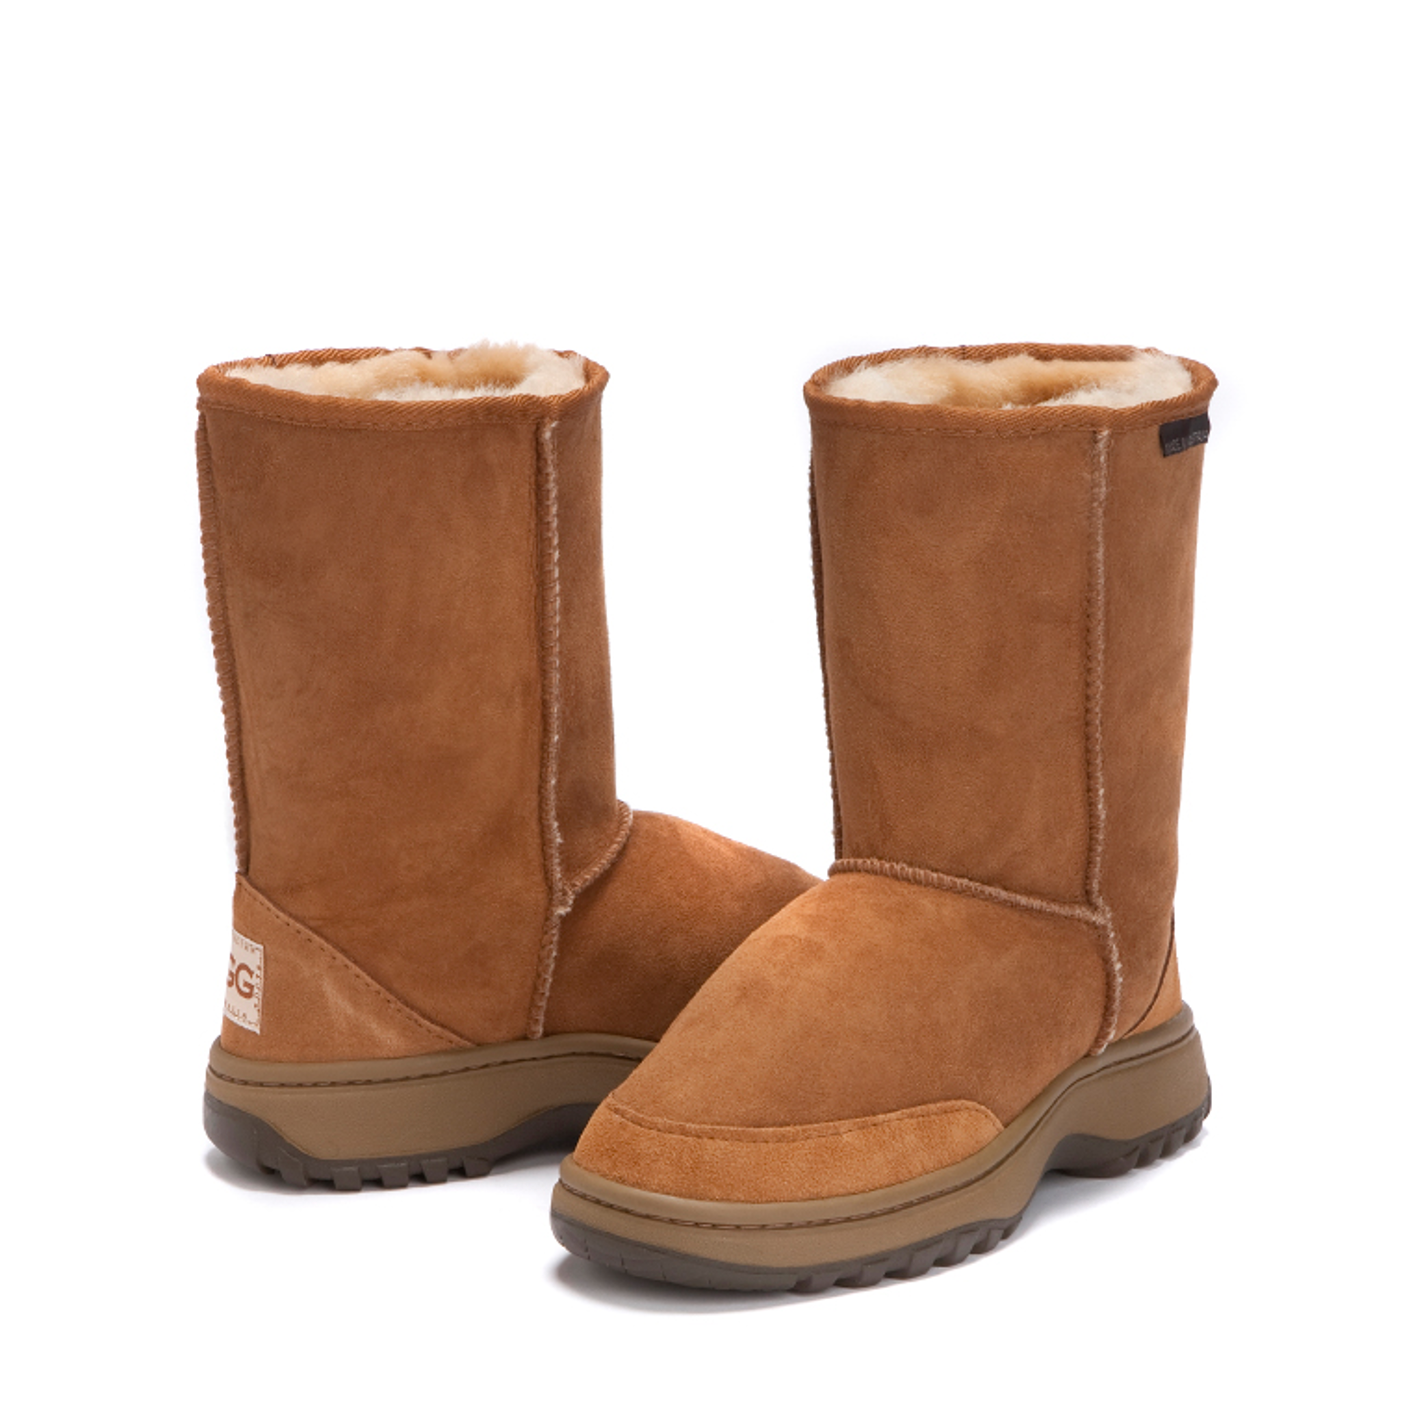 Chestnut colour outdoor ugg boots with durable sole